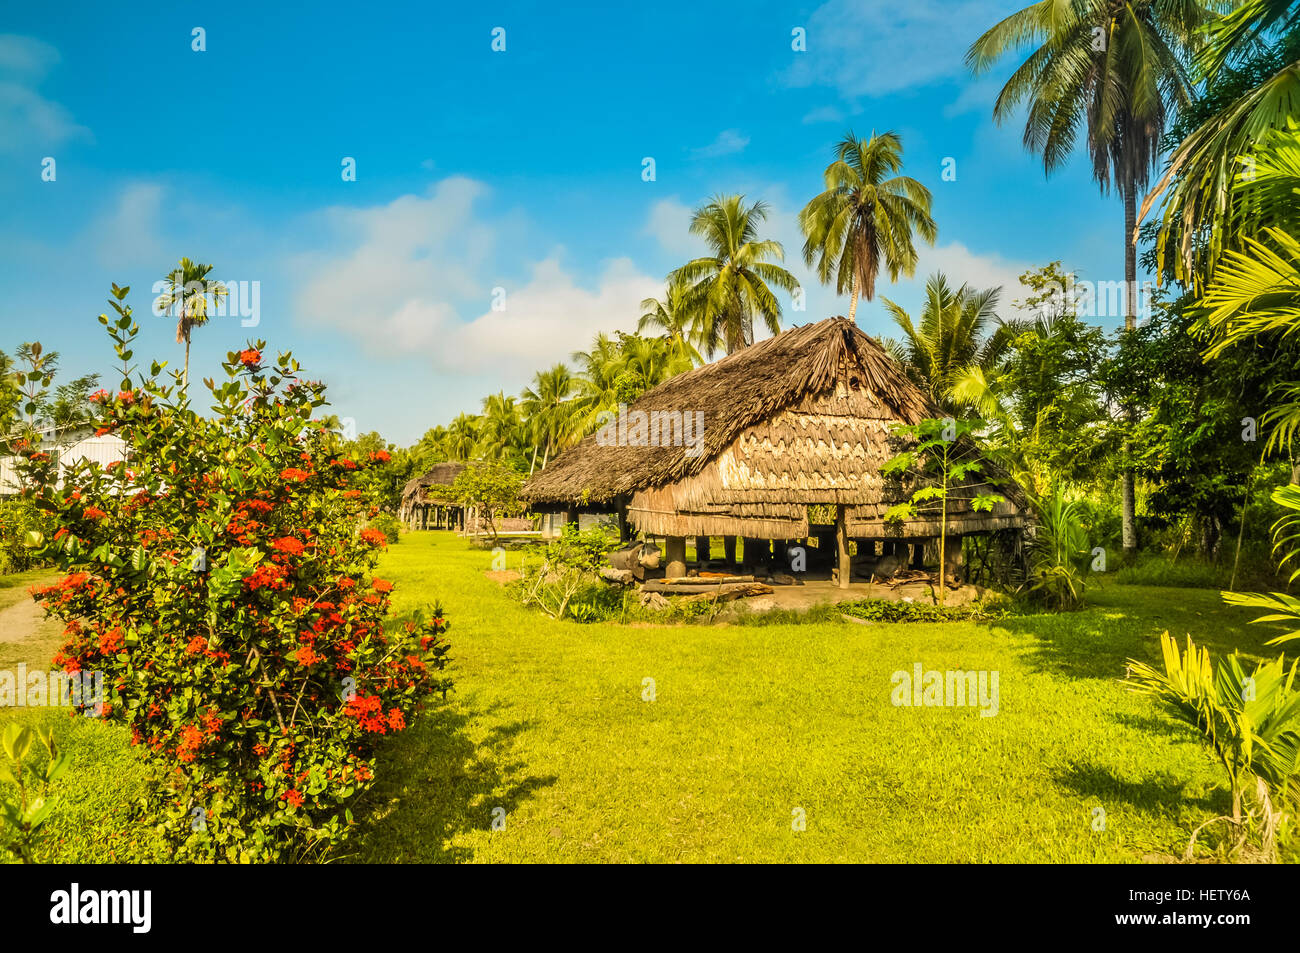 House made of straw and wood surrounded by palms and flowers during sunny weather in Avatip, Sepik river in Papua New Guinea. Stock Photo